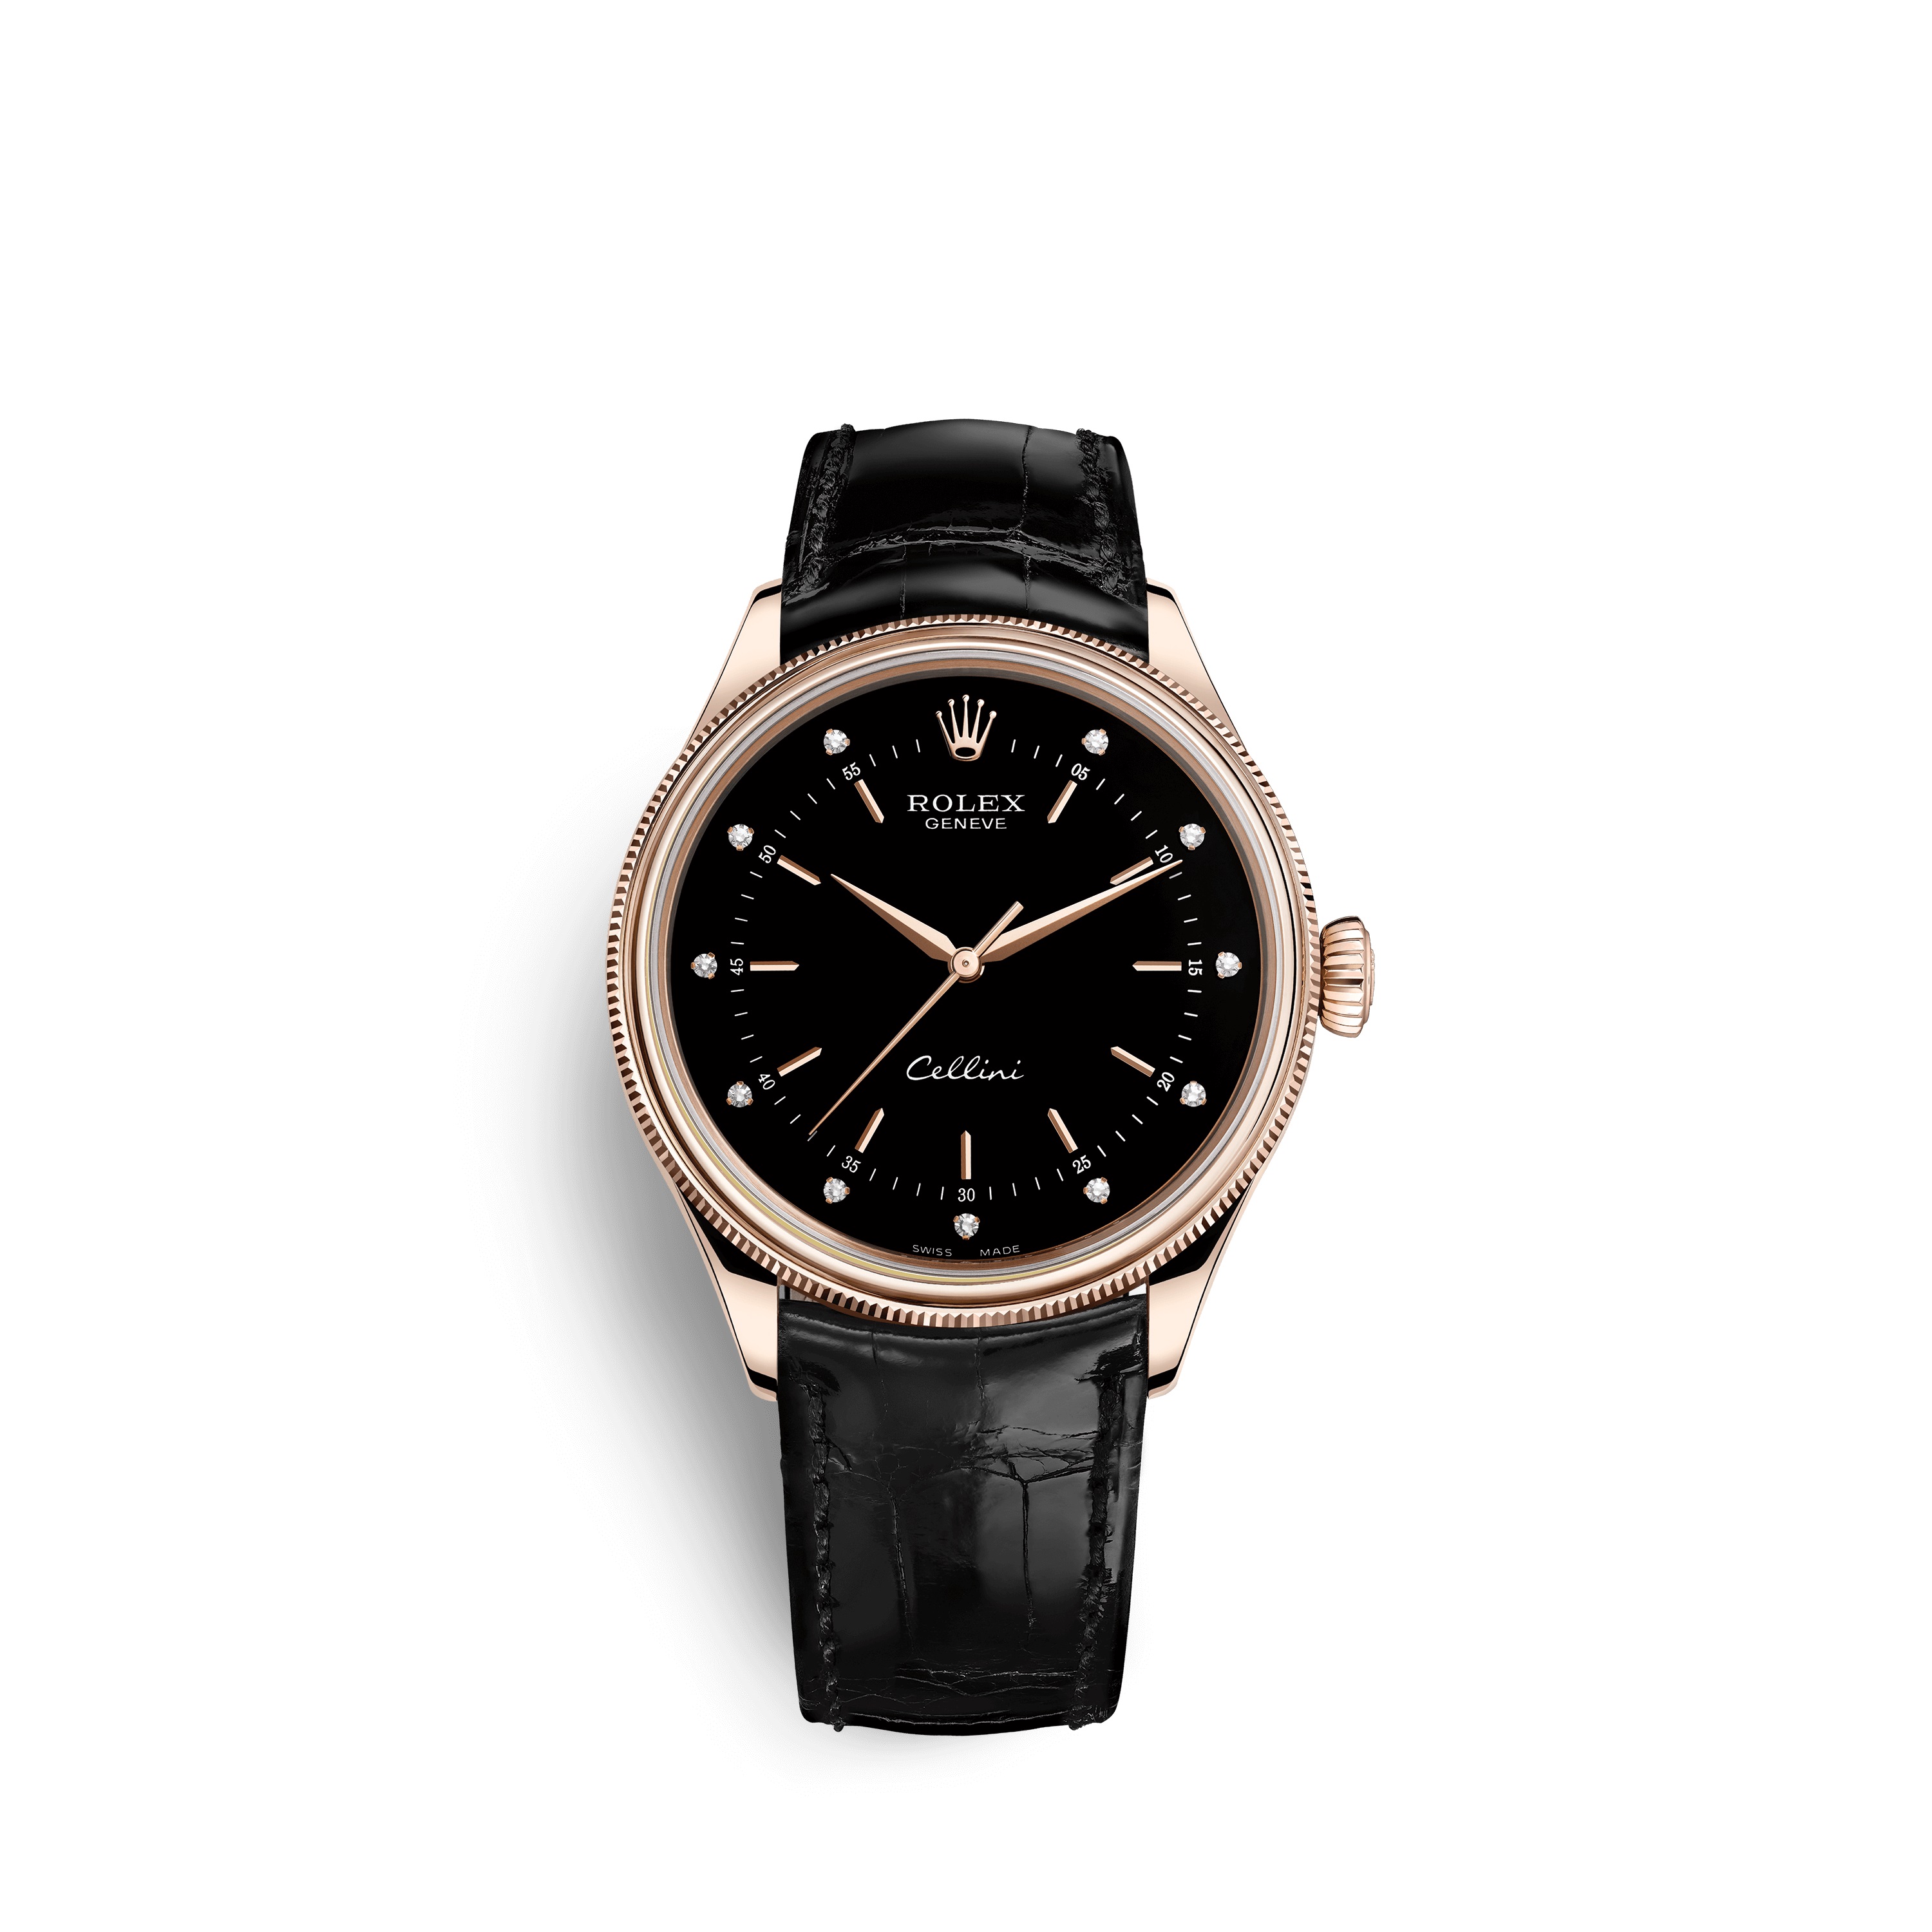 Cellini Time 50505 Rose Gold Watch (Black Set with Diamonds)